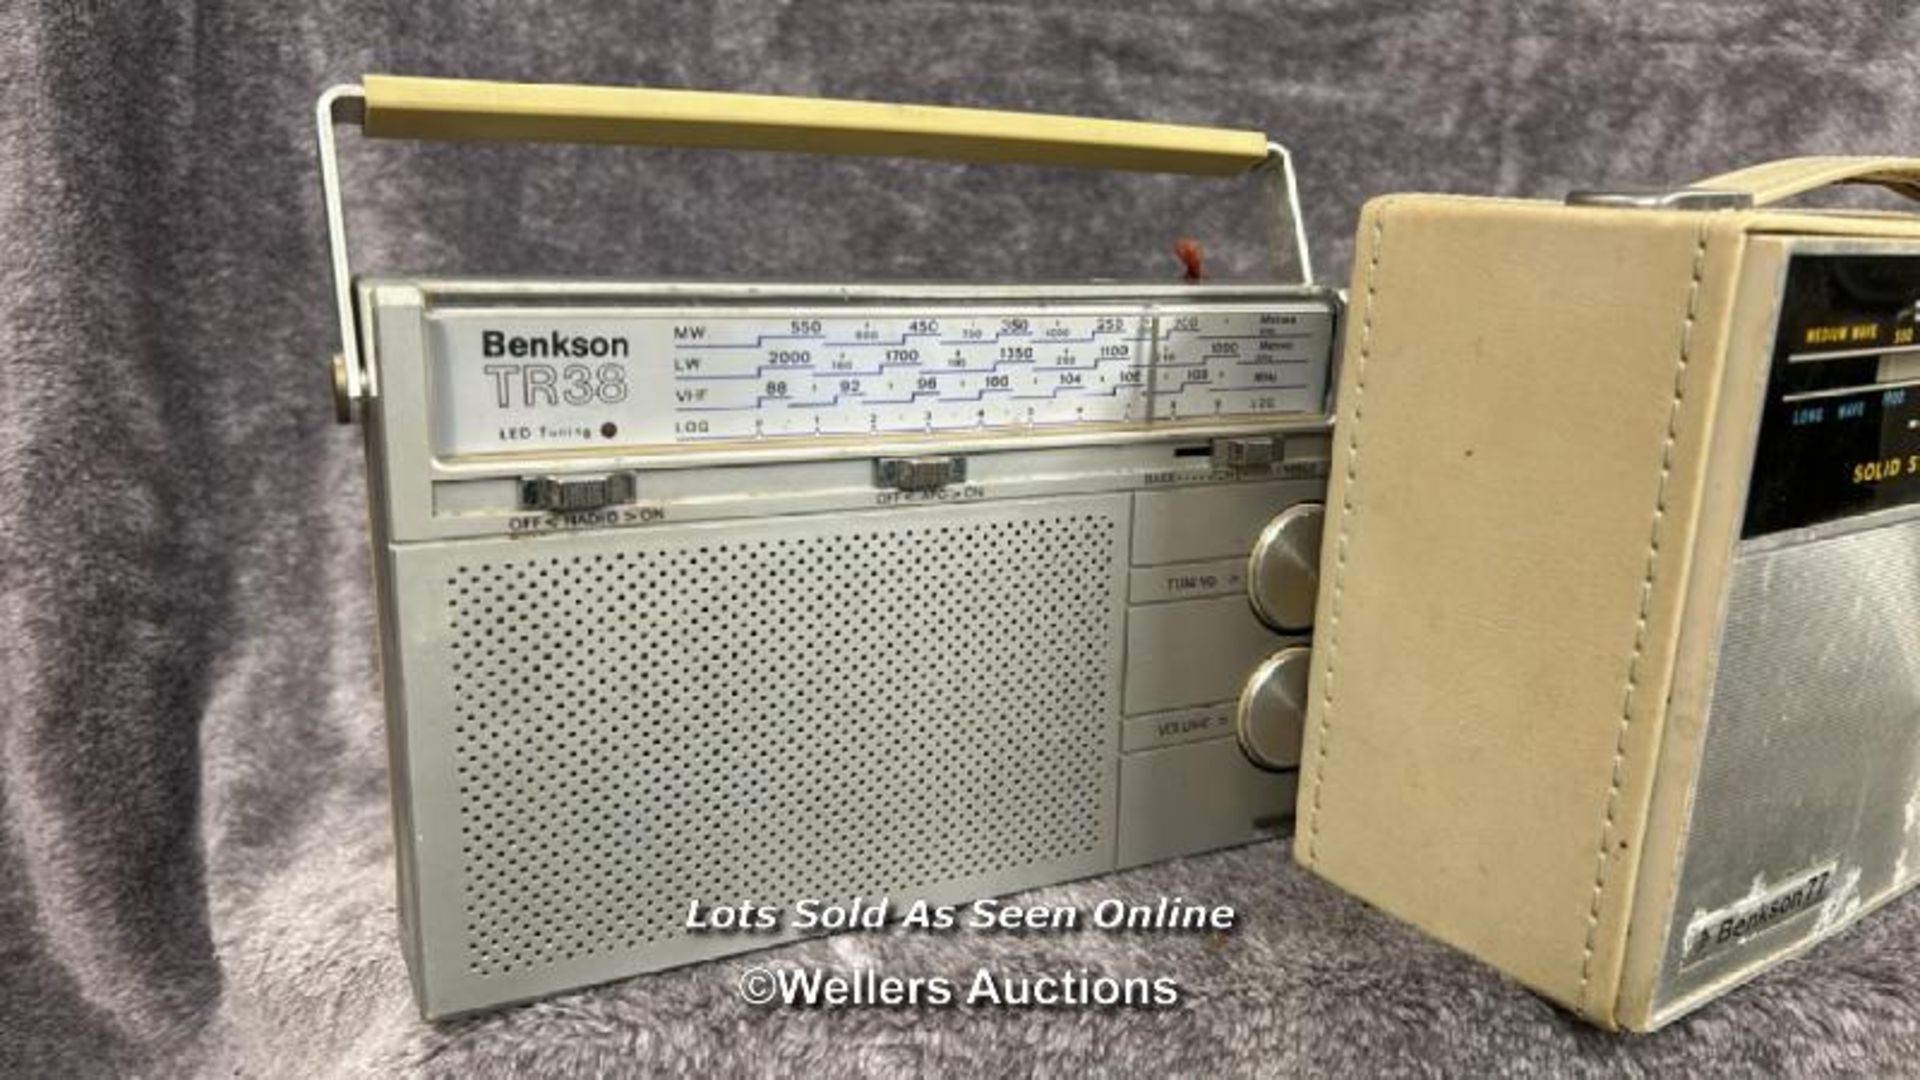 Assorted unboxed vintage electricals including Benkson radios, Aero 6 transister, Dixons radio, - Image 7 of 17